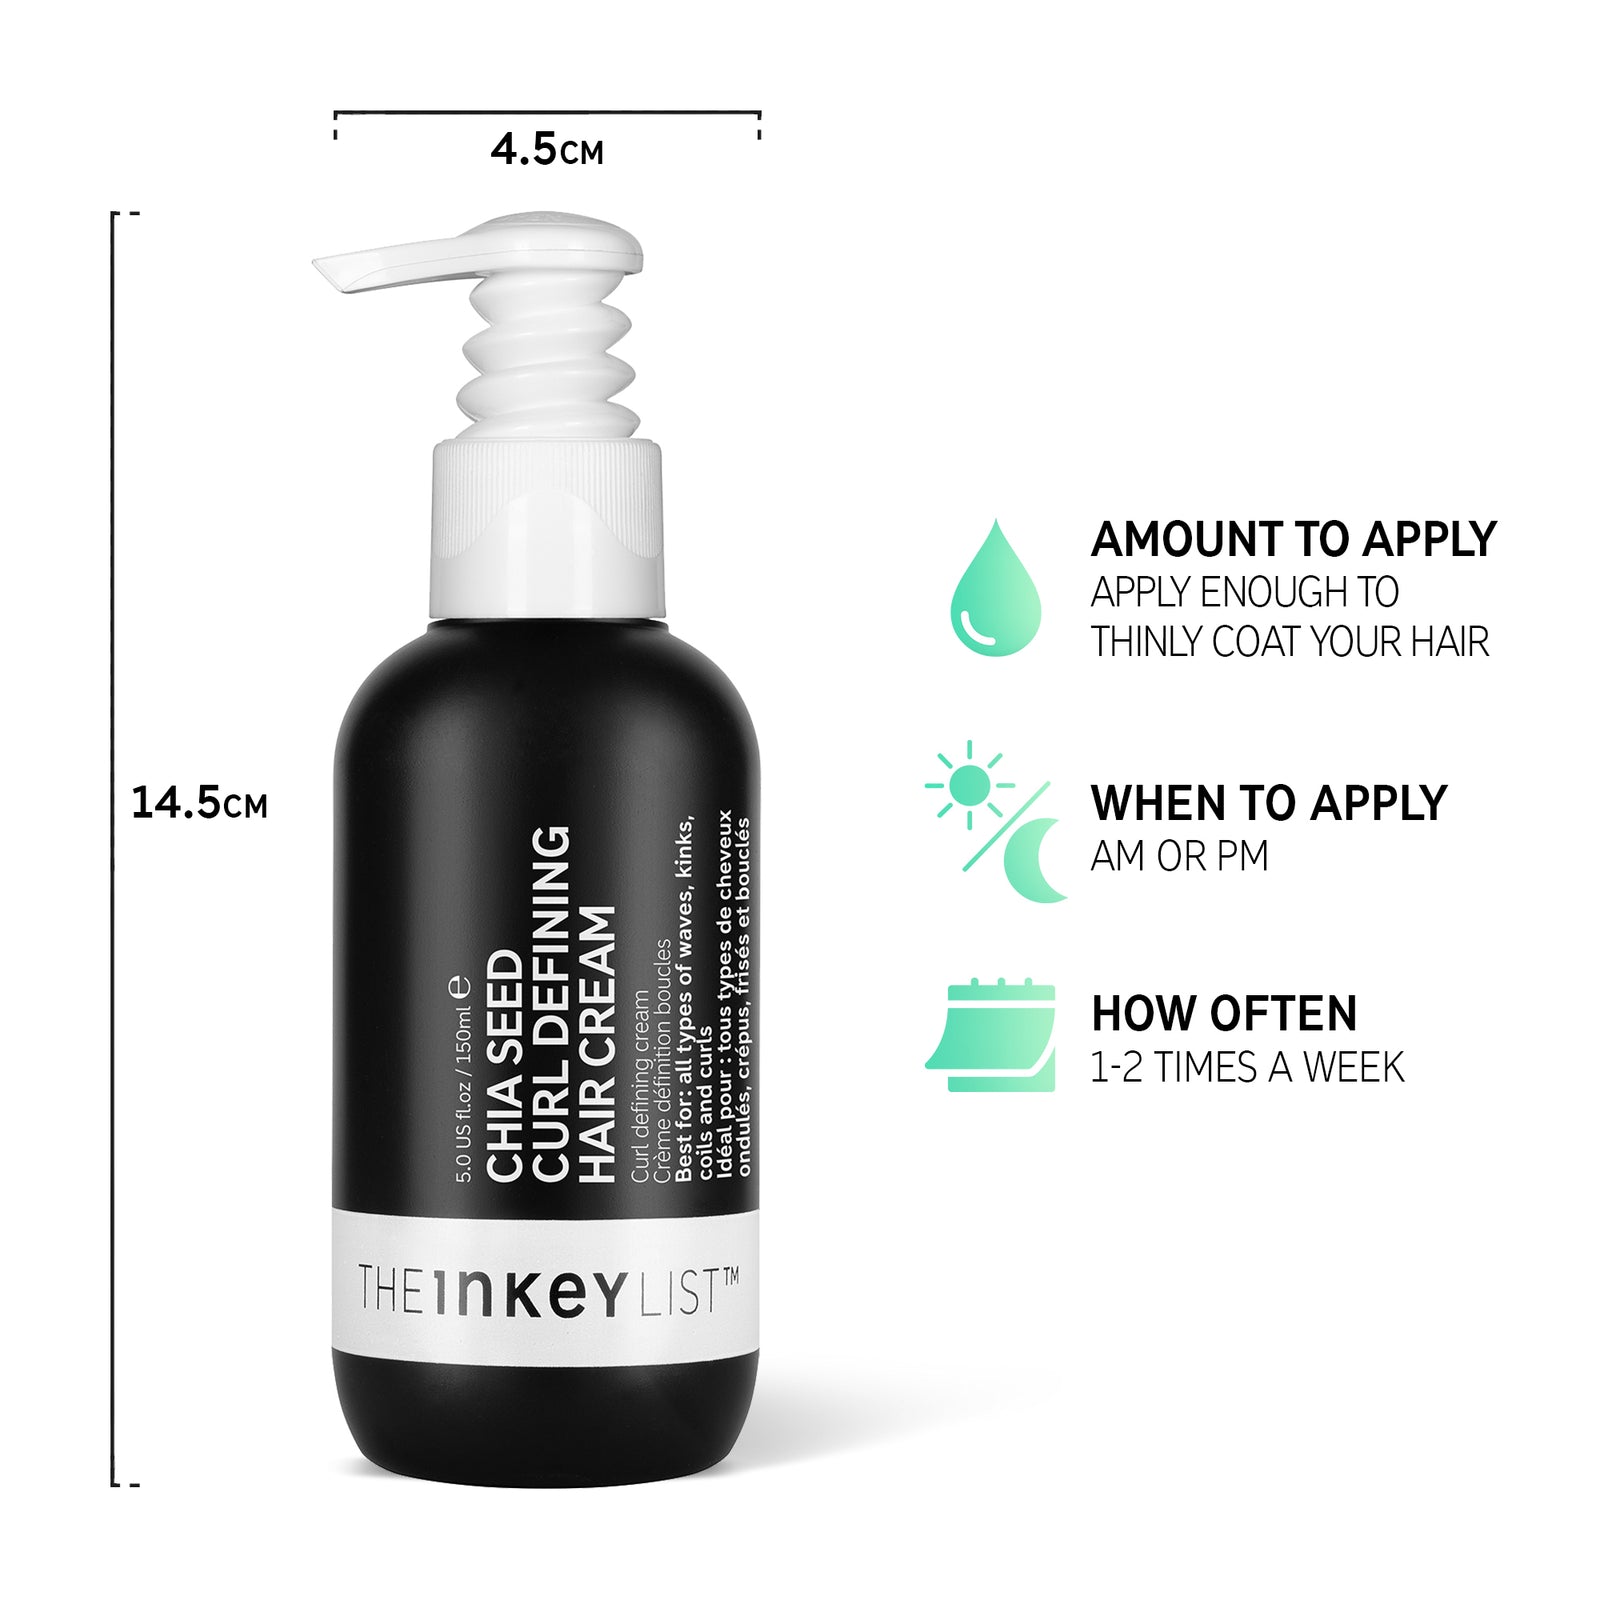 Infographic with bottle dimensions and amount to apply (enough to thinly coat hair), when to apply (AM or PM) and how often (1-2 times a week)